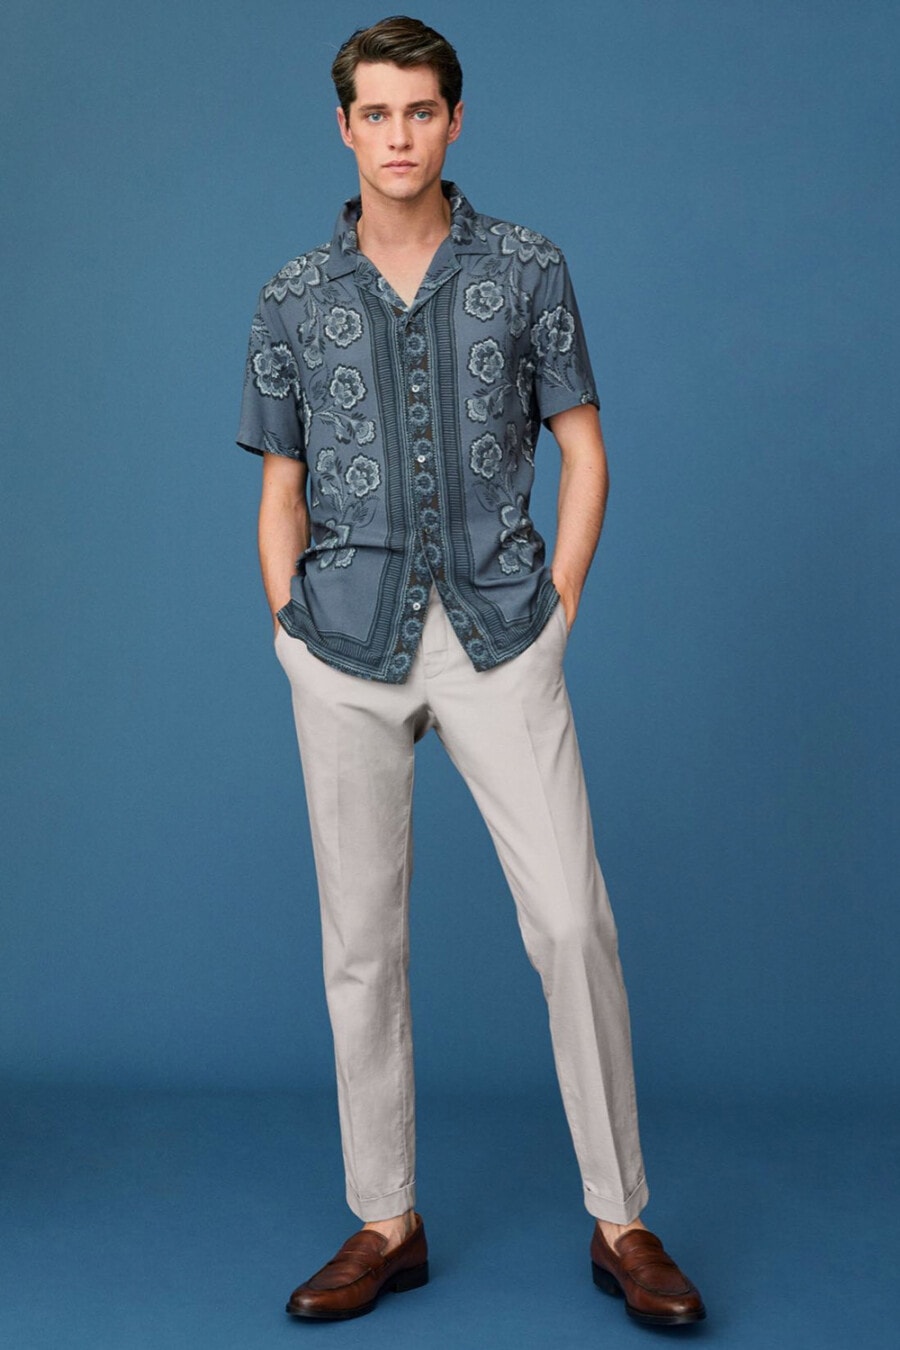 Men's light grey pants, printed short sleeve shirt and leather penny loafers outfit